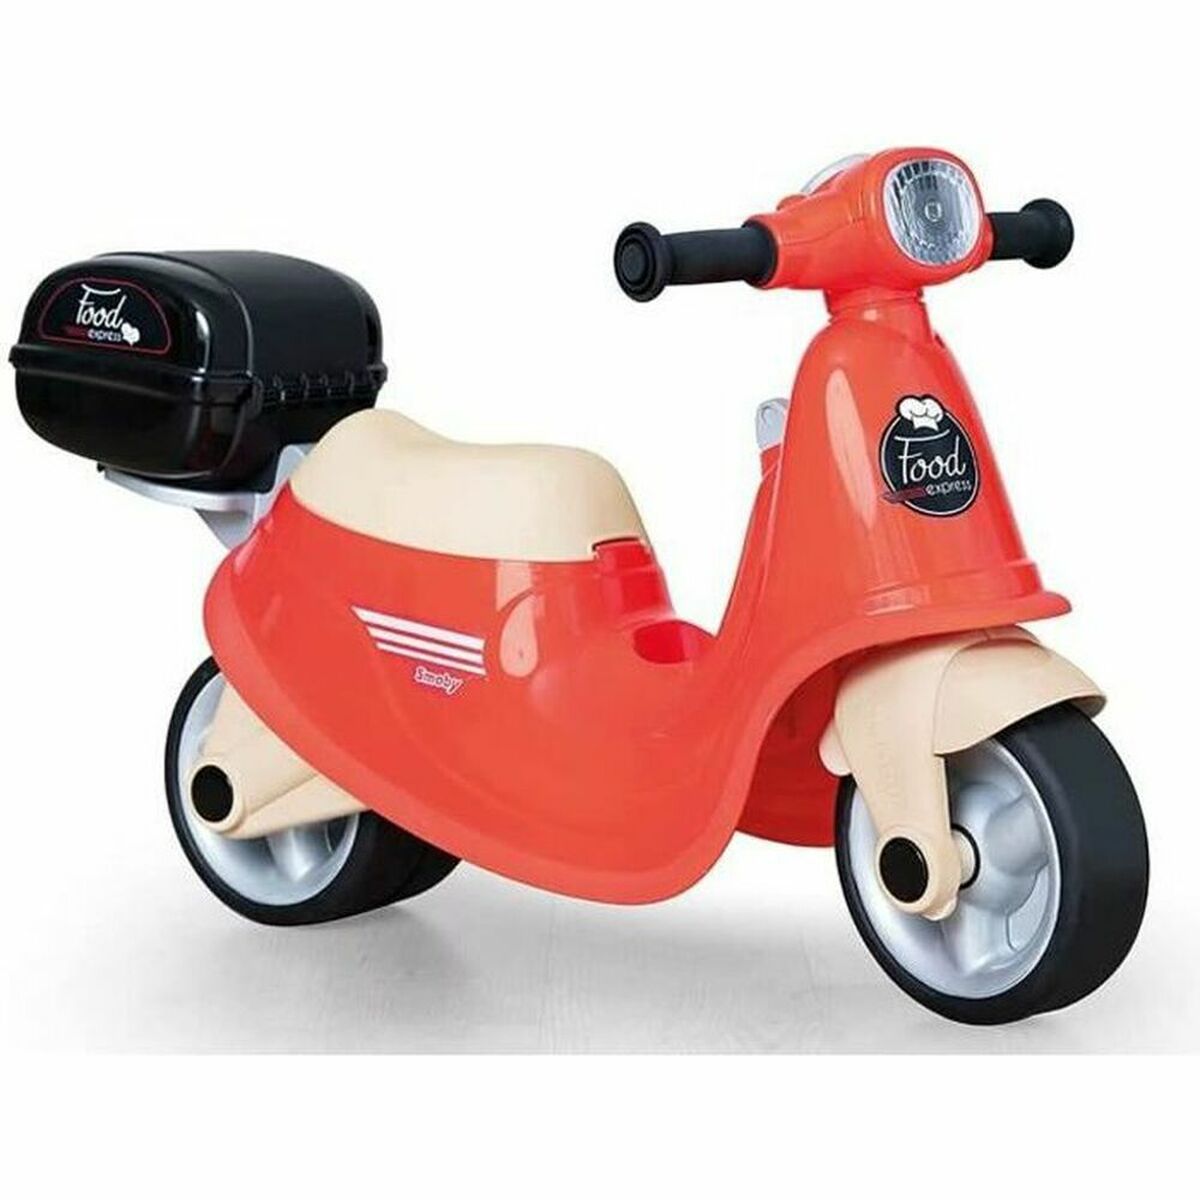 Children's Bike Smoby Food Express Scooter Carrier  Without pedals Motorcycle